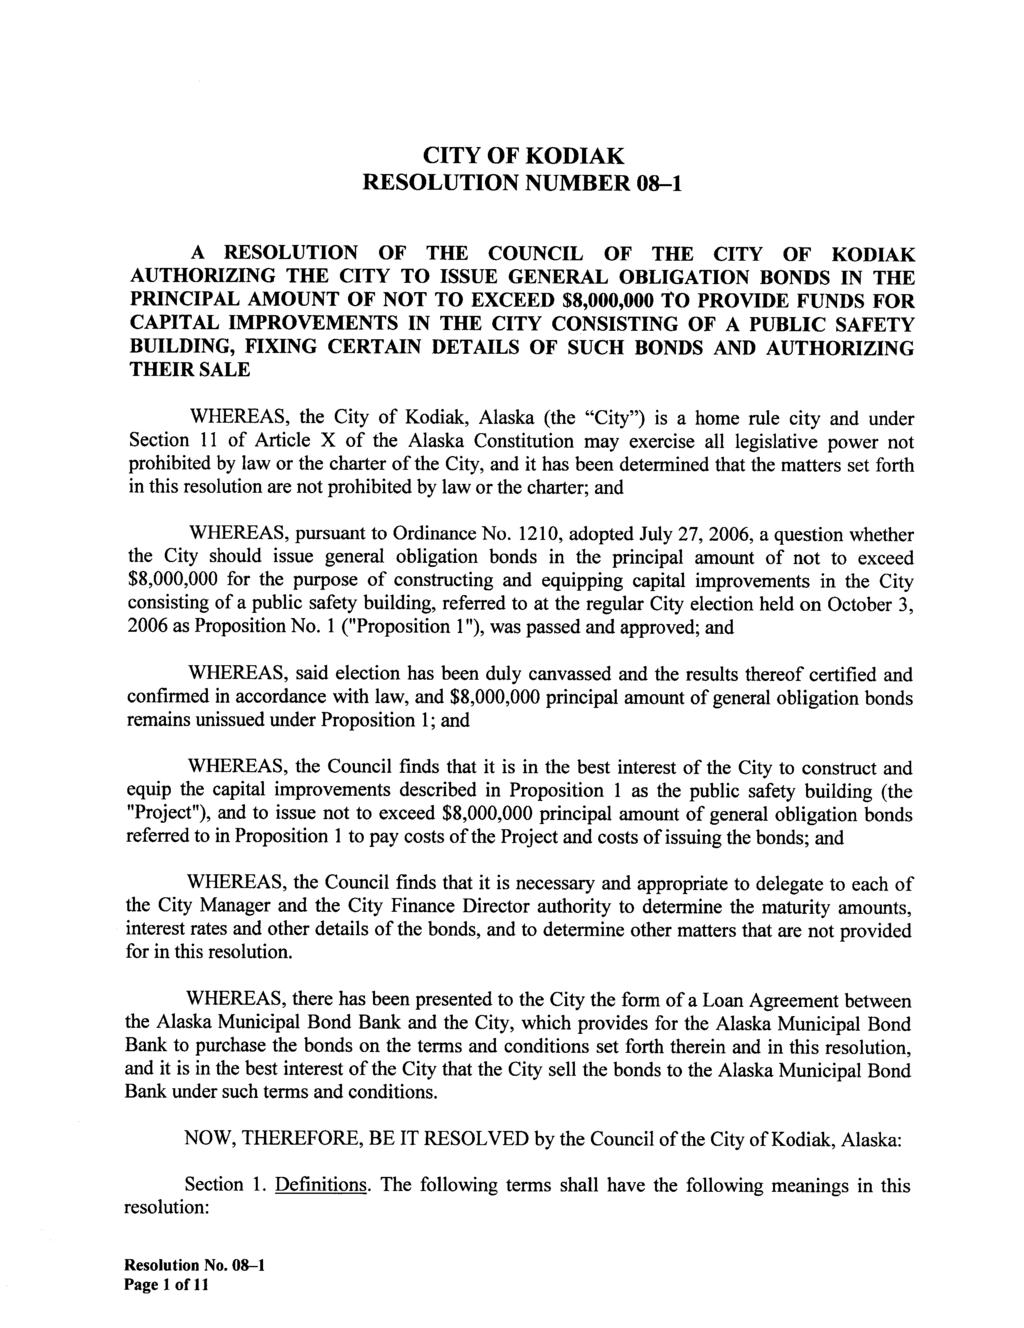 CITY OF KODIAK RESOLUTION NUMBER 08-1 A RESOLUTION OF THE COUNCIL OF THE CITY OF KODIAK AUTHORIZING THE CITY TO ISSUE GENERAL OBLIGATION BONDS IN THE PRINCIPAL AMOUNT OF NOT TO EXCEED $8,000,000 TO